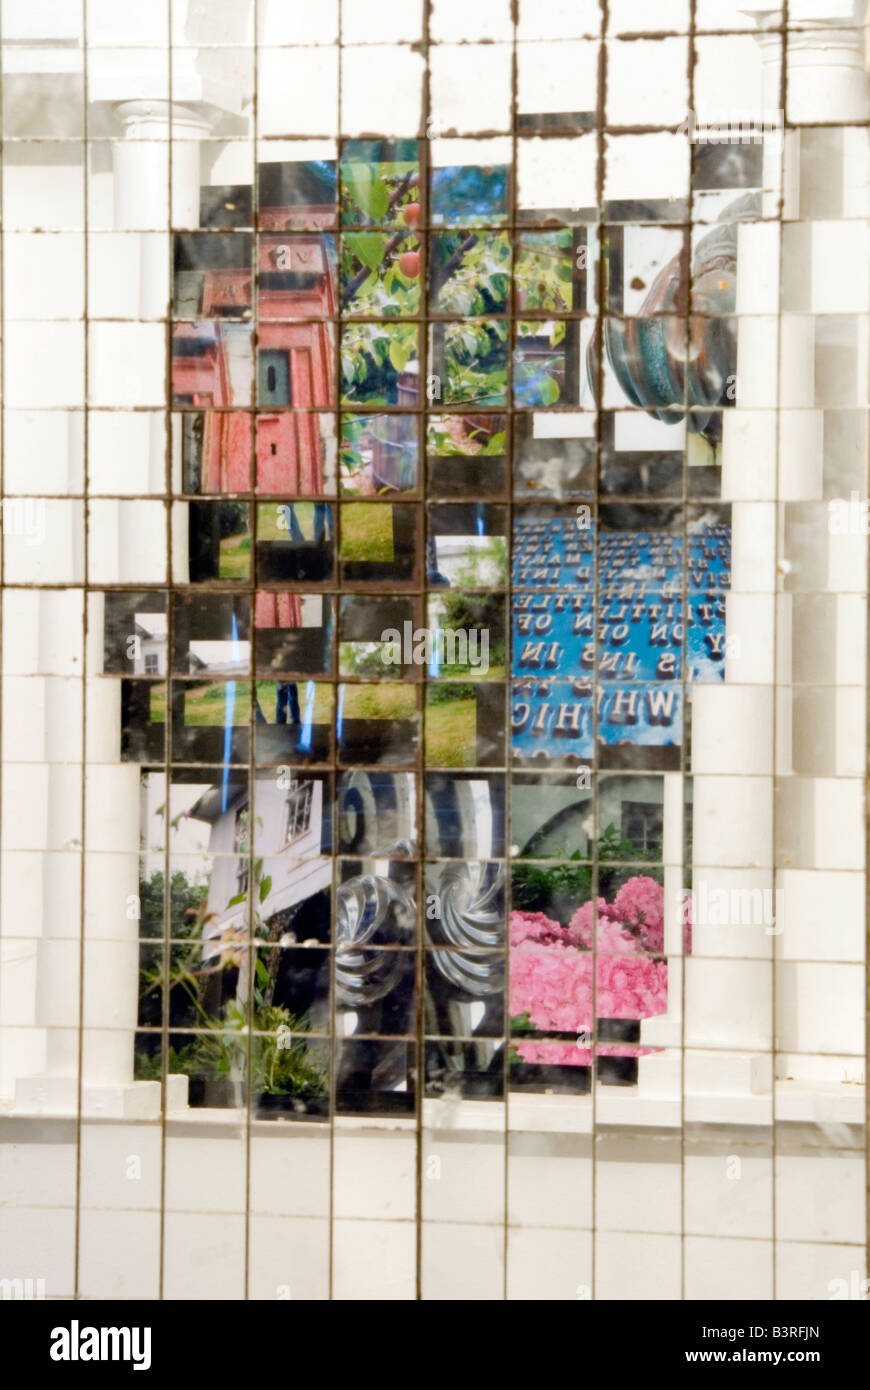 Grove House, Oxford, UK, Nov 2006: photo montage displayed in an alcove with two pillars reflected in a tiled mirror, abstract. Stock Photo